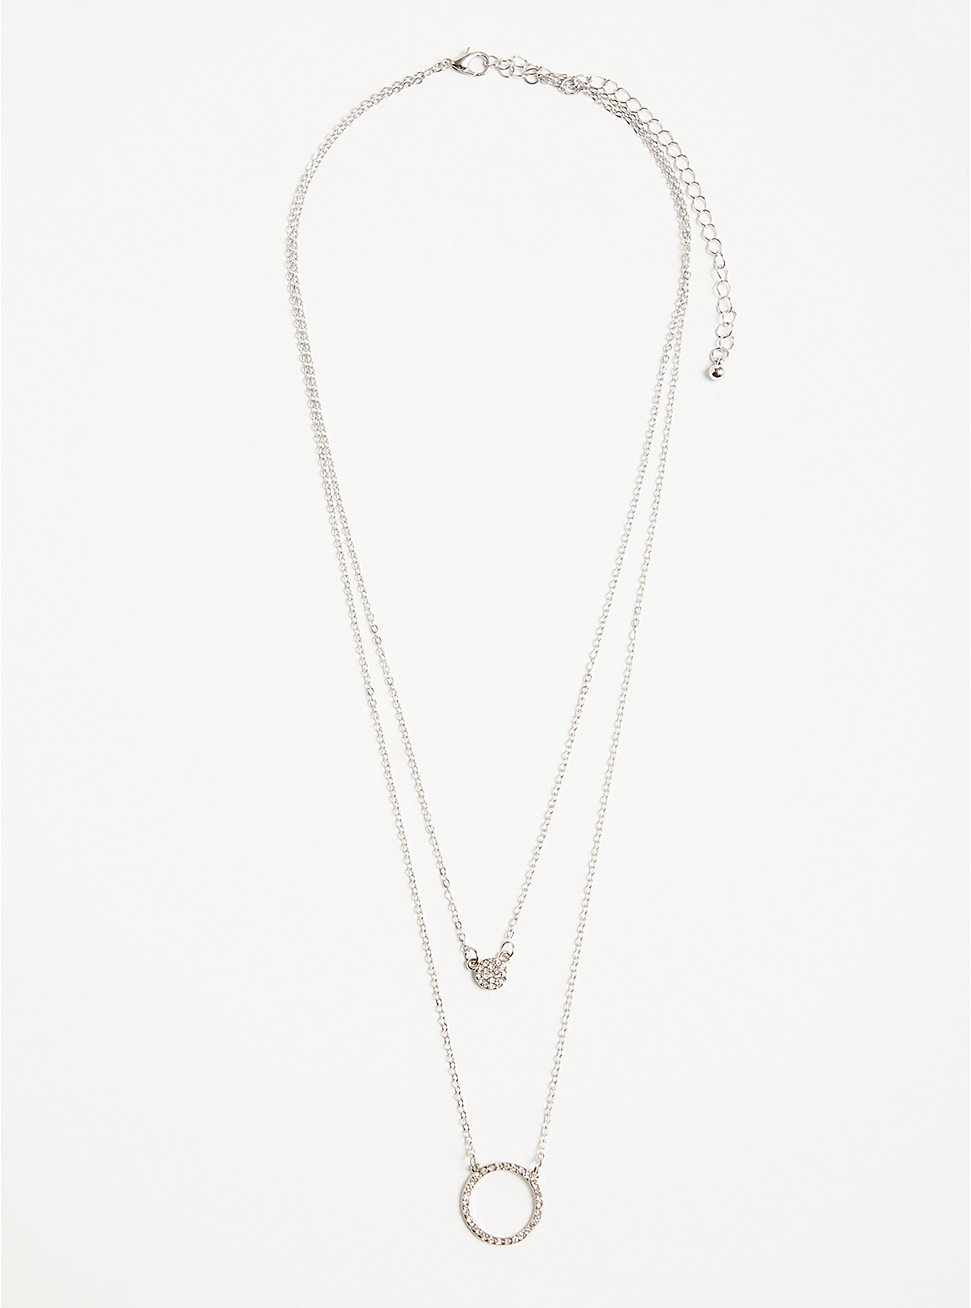 Layered Necklace with Pave Circles - Silver Tone, , hi-res